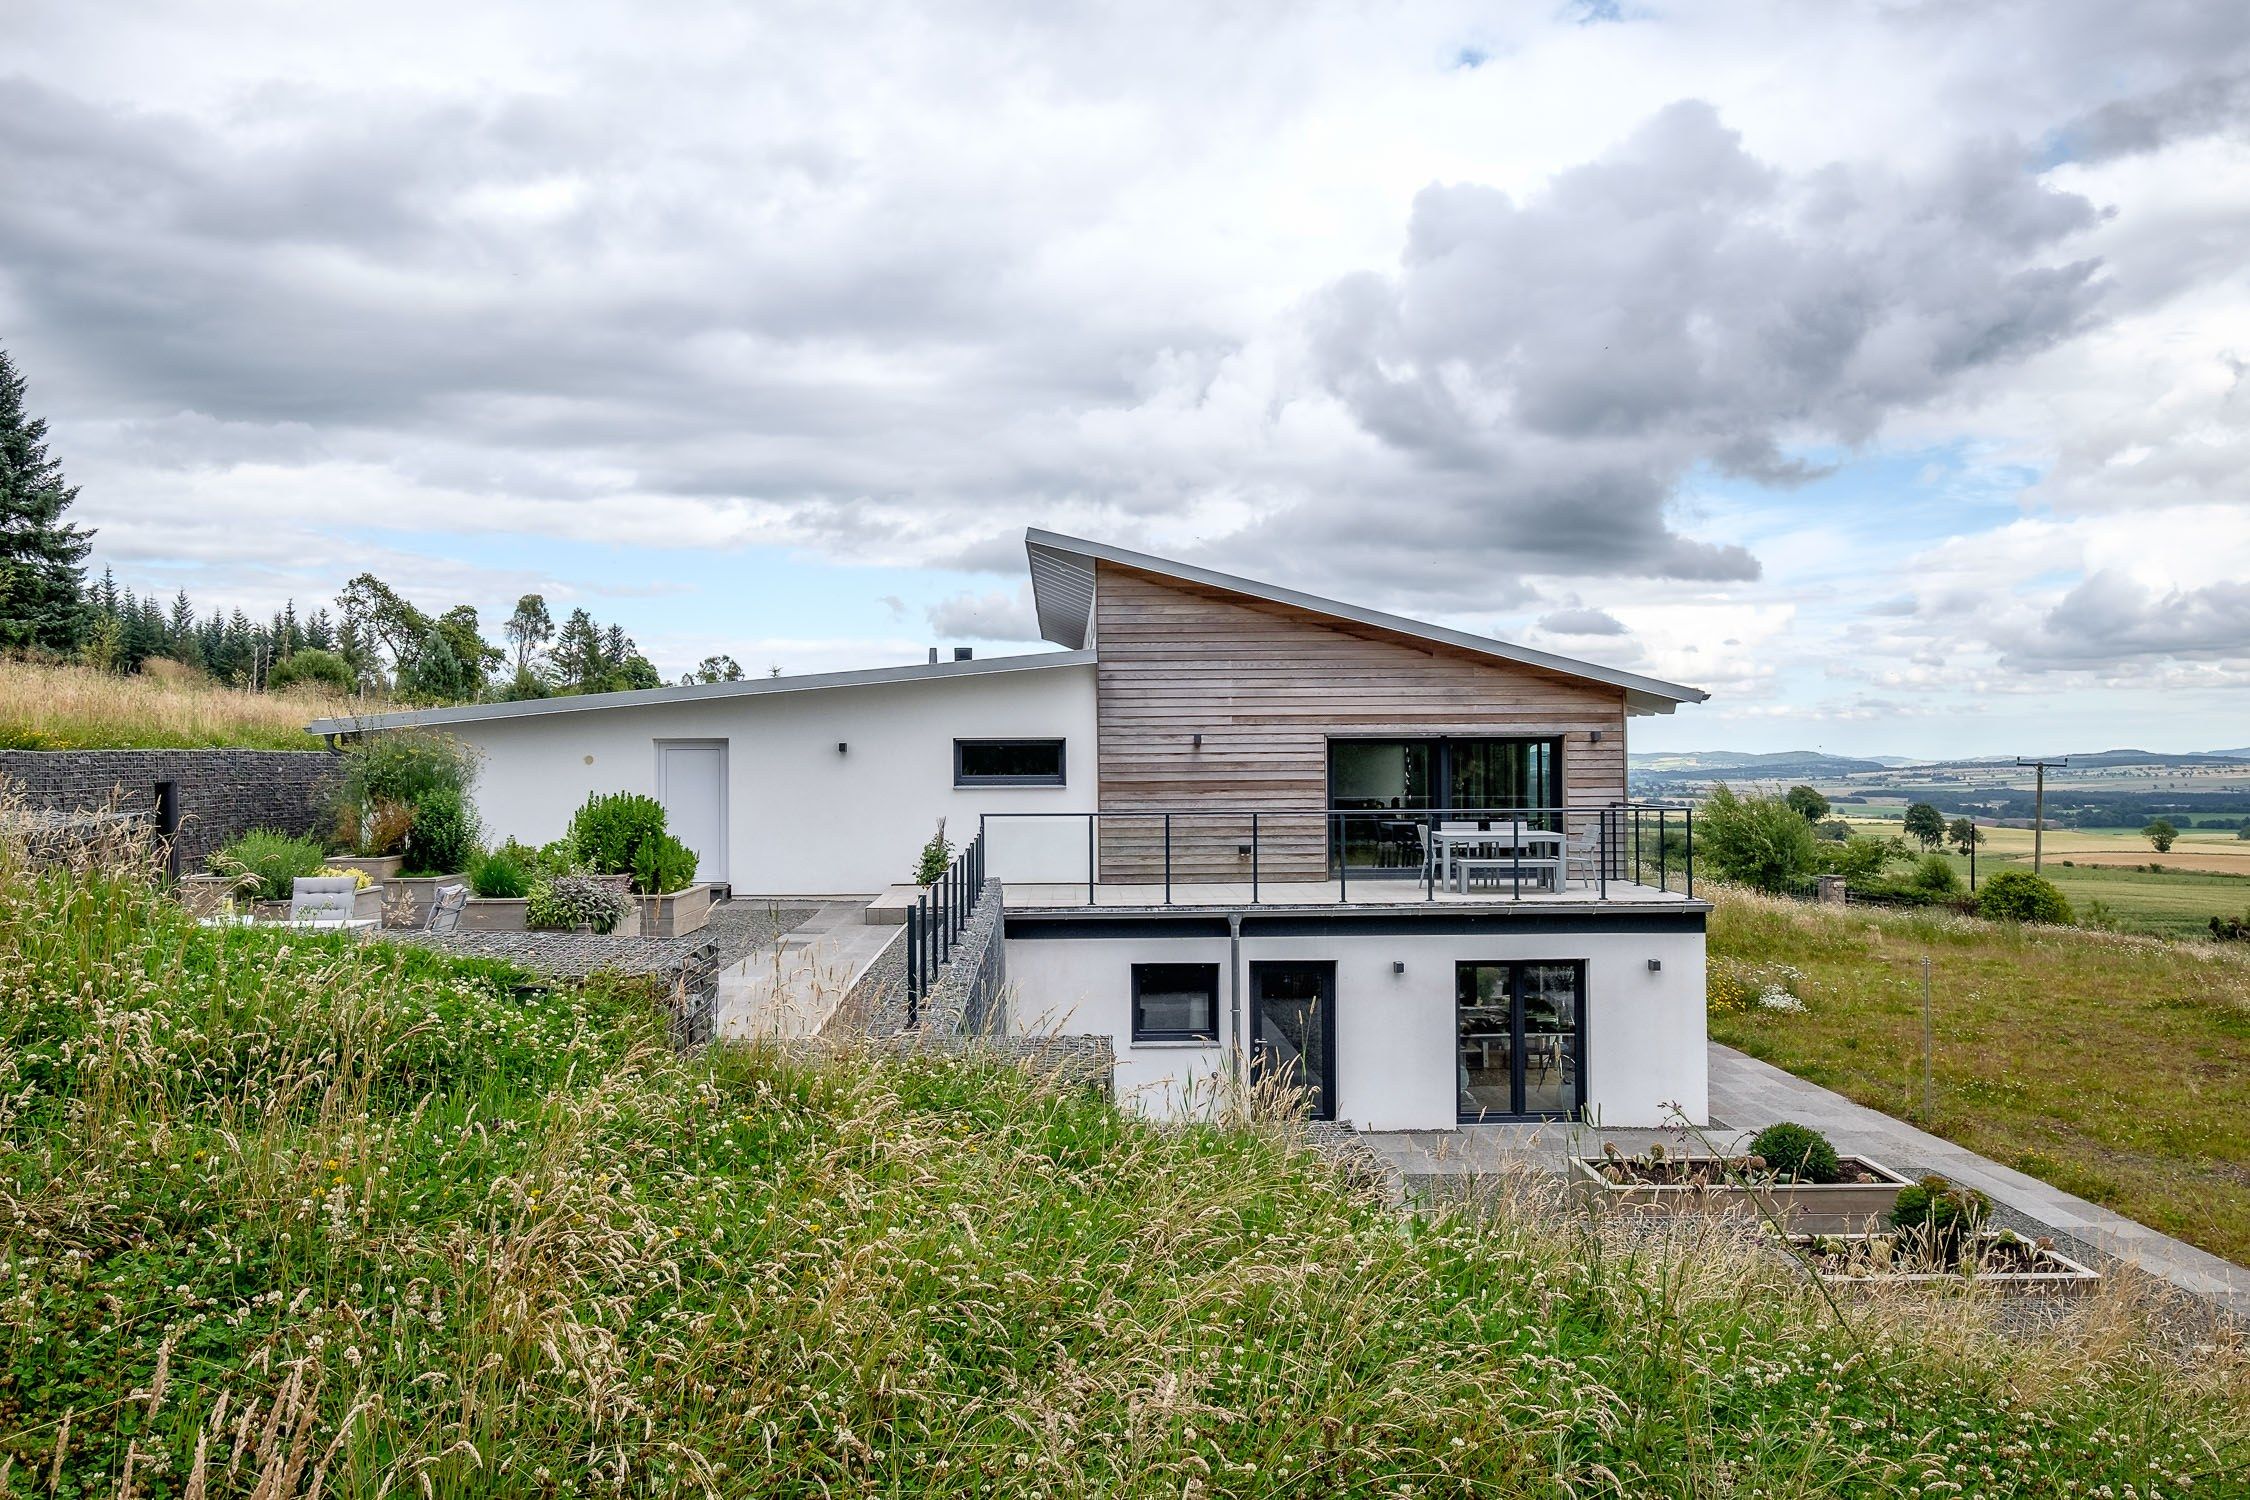 Contemporary designed home with off set roofs, larch cladding, white render, Gabion baskets and green garden.